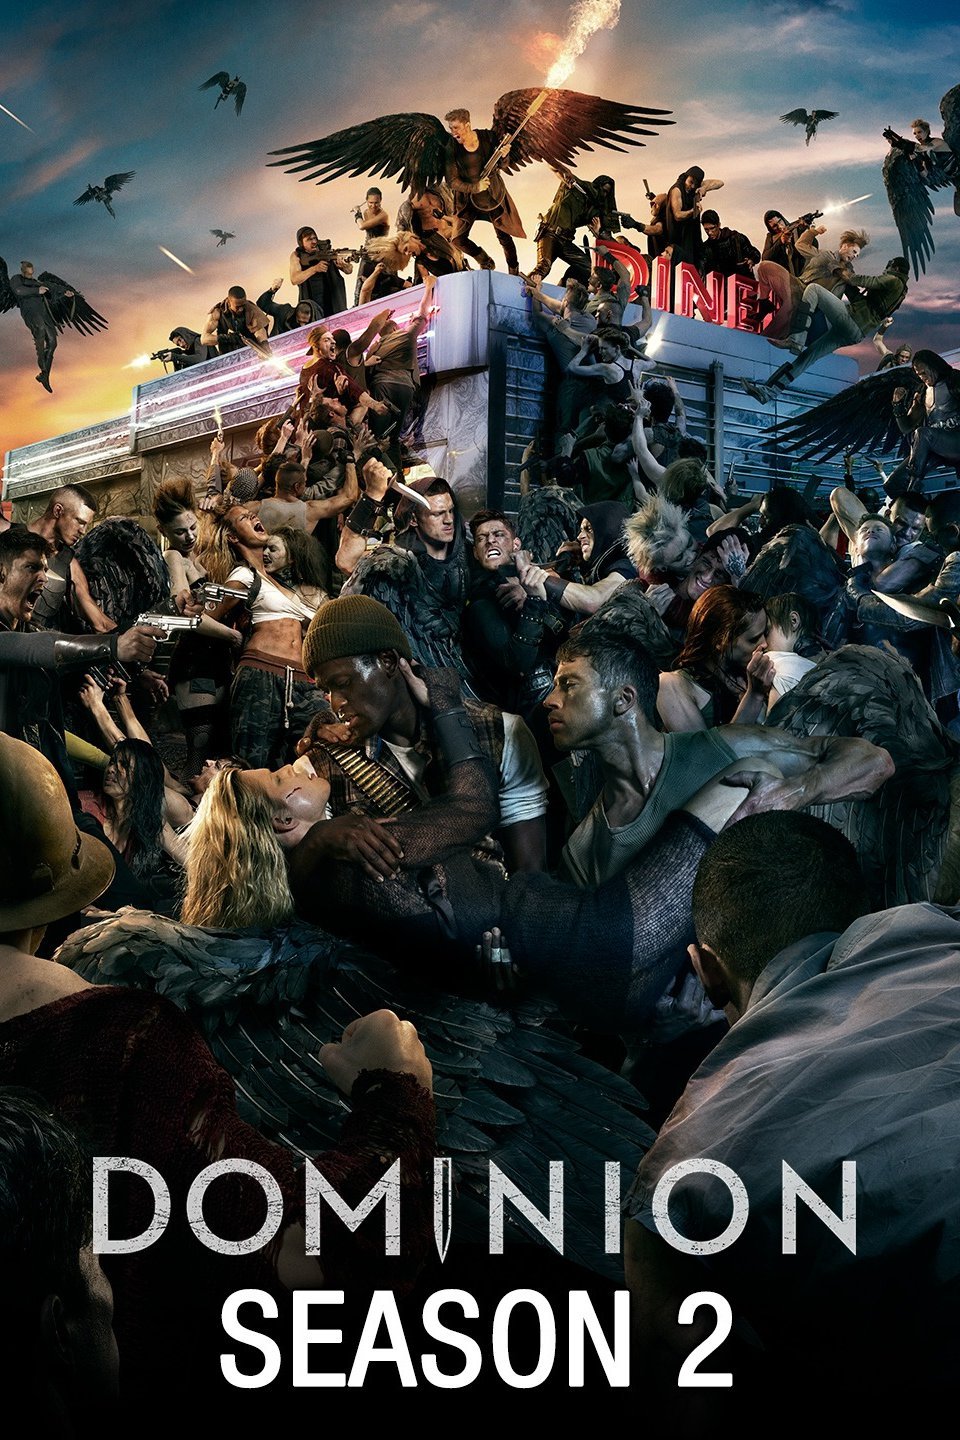 Dominion Season 2 Complete Hindi Dubbed ORG All Episodes 720p WEB-DL 4.1GB Download